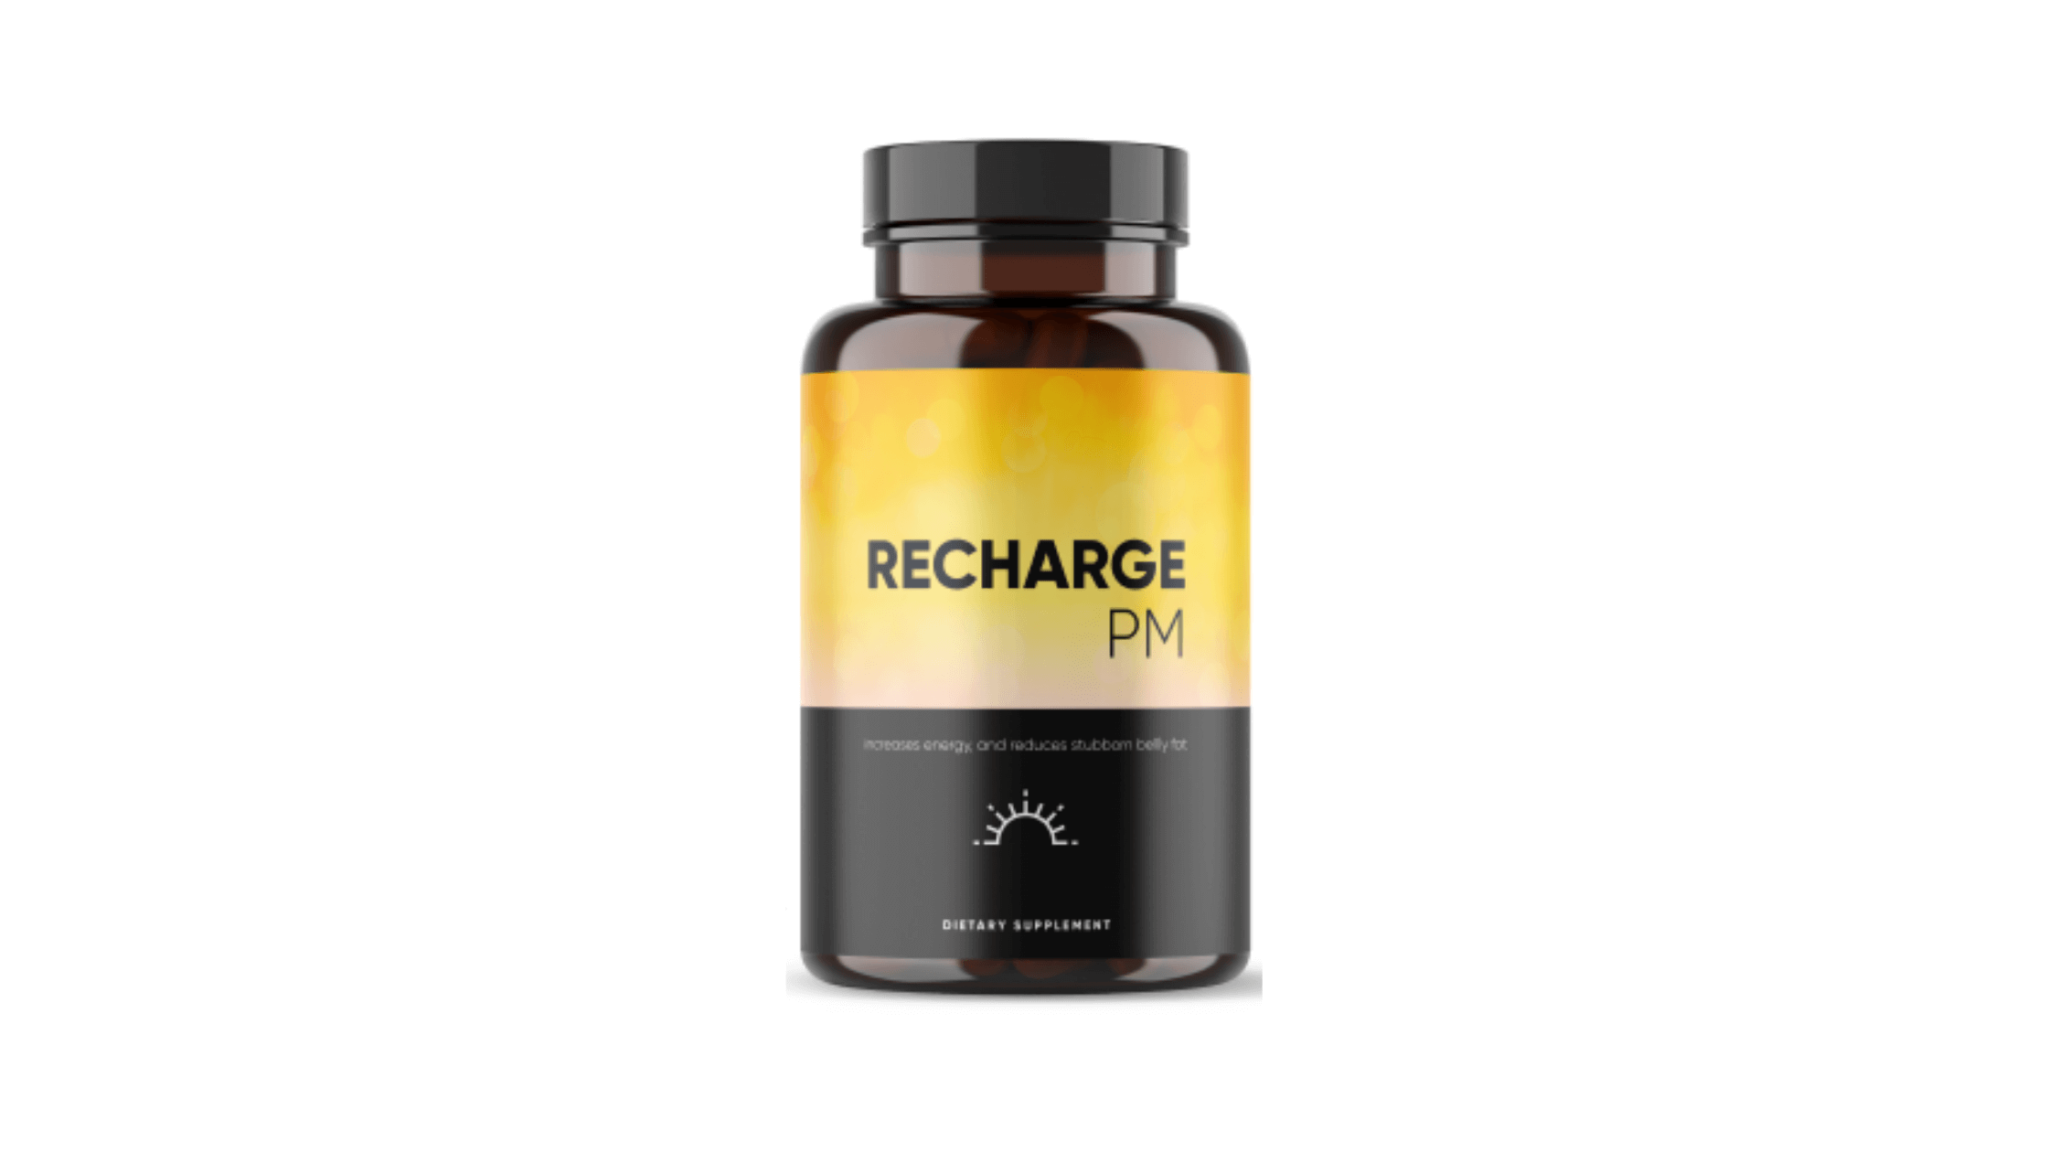 Recharge PM Reviews